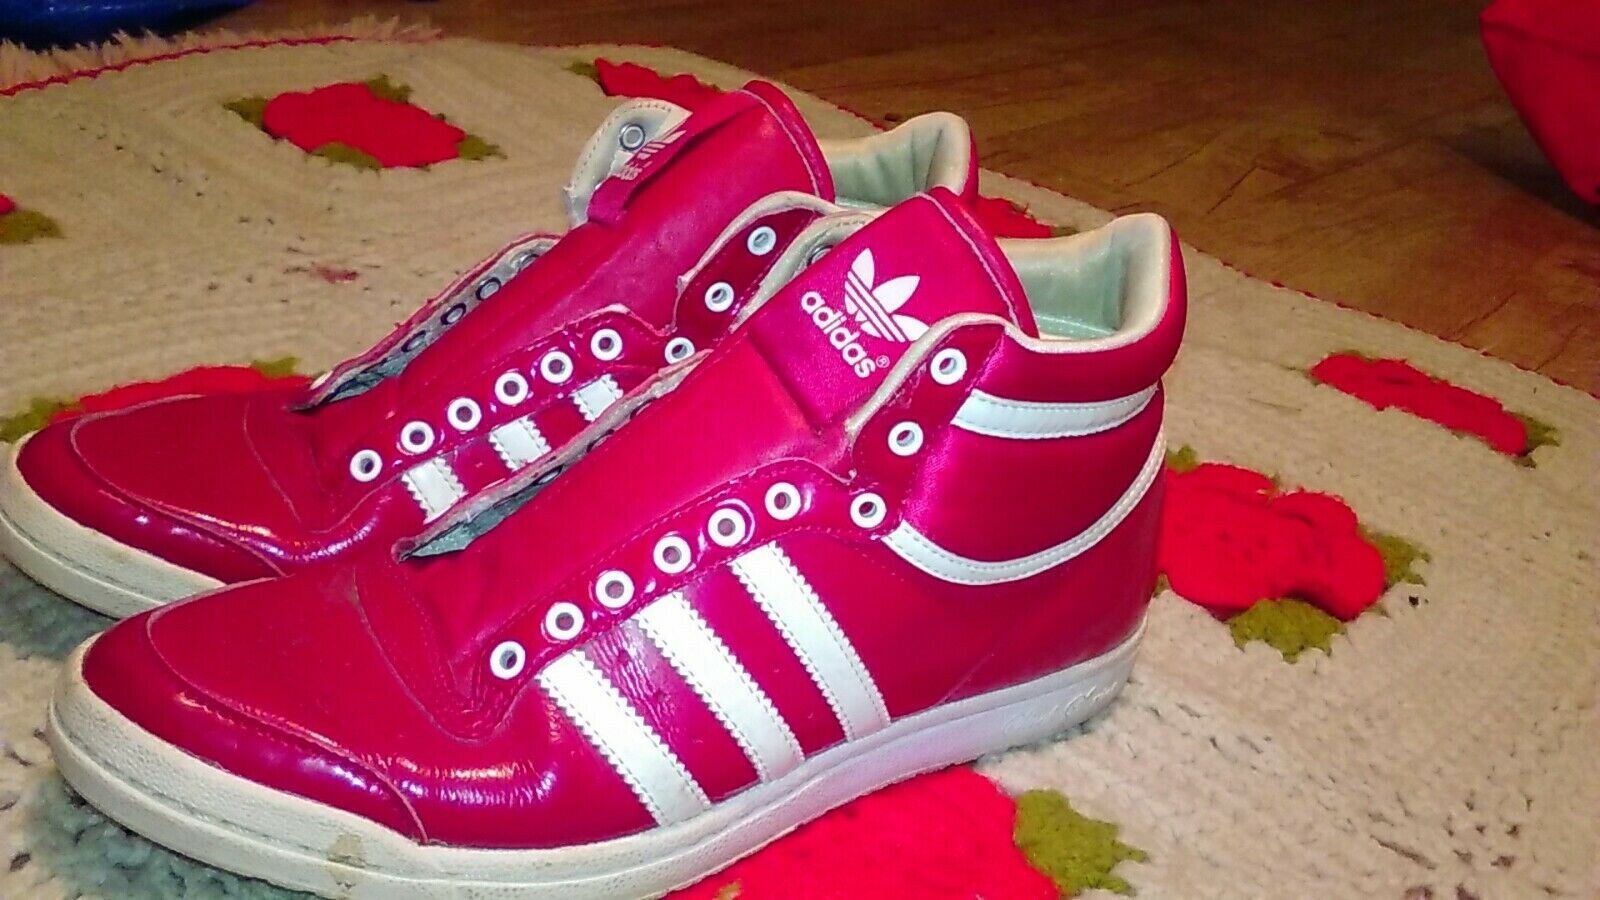 2012 Adidas Sleek Series Women's High Top Shoes Size 7 Red Shine no laces